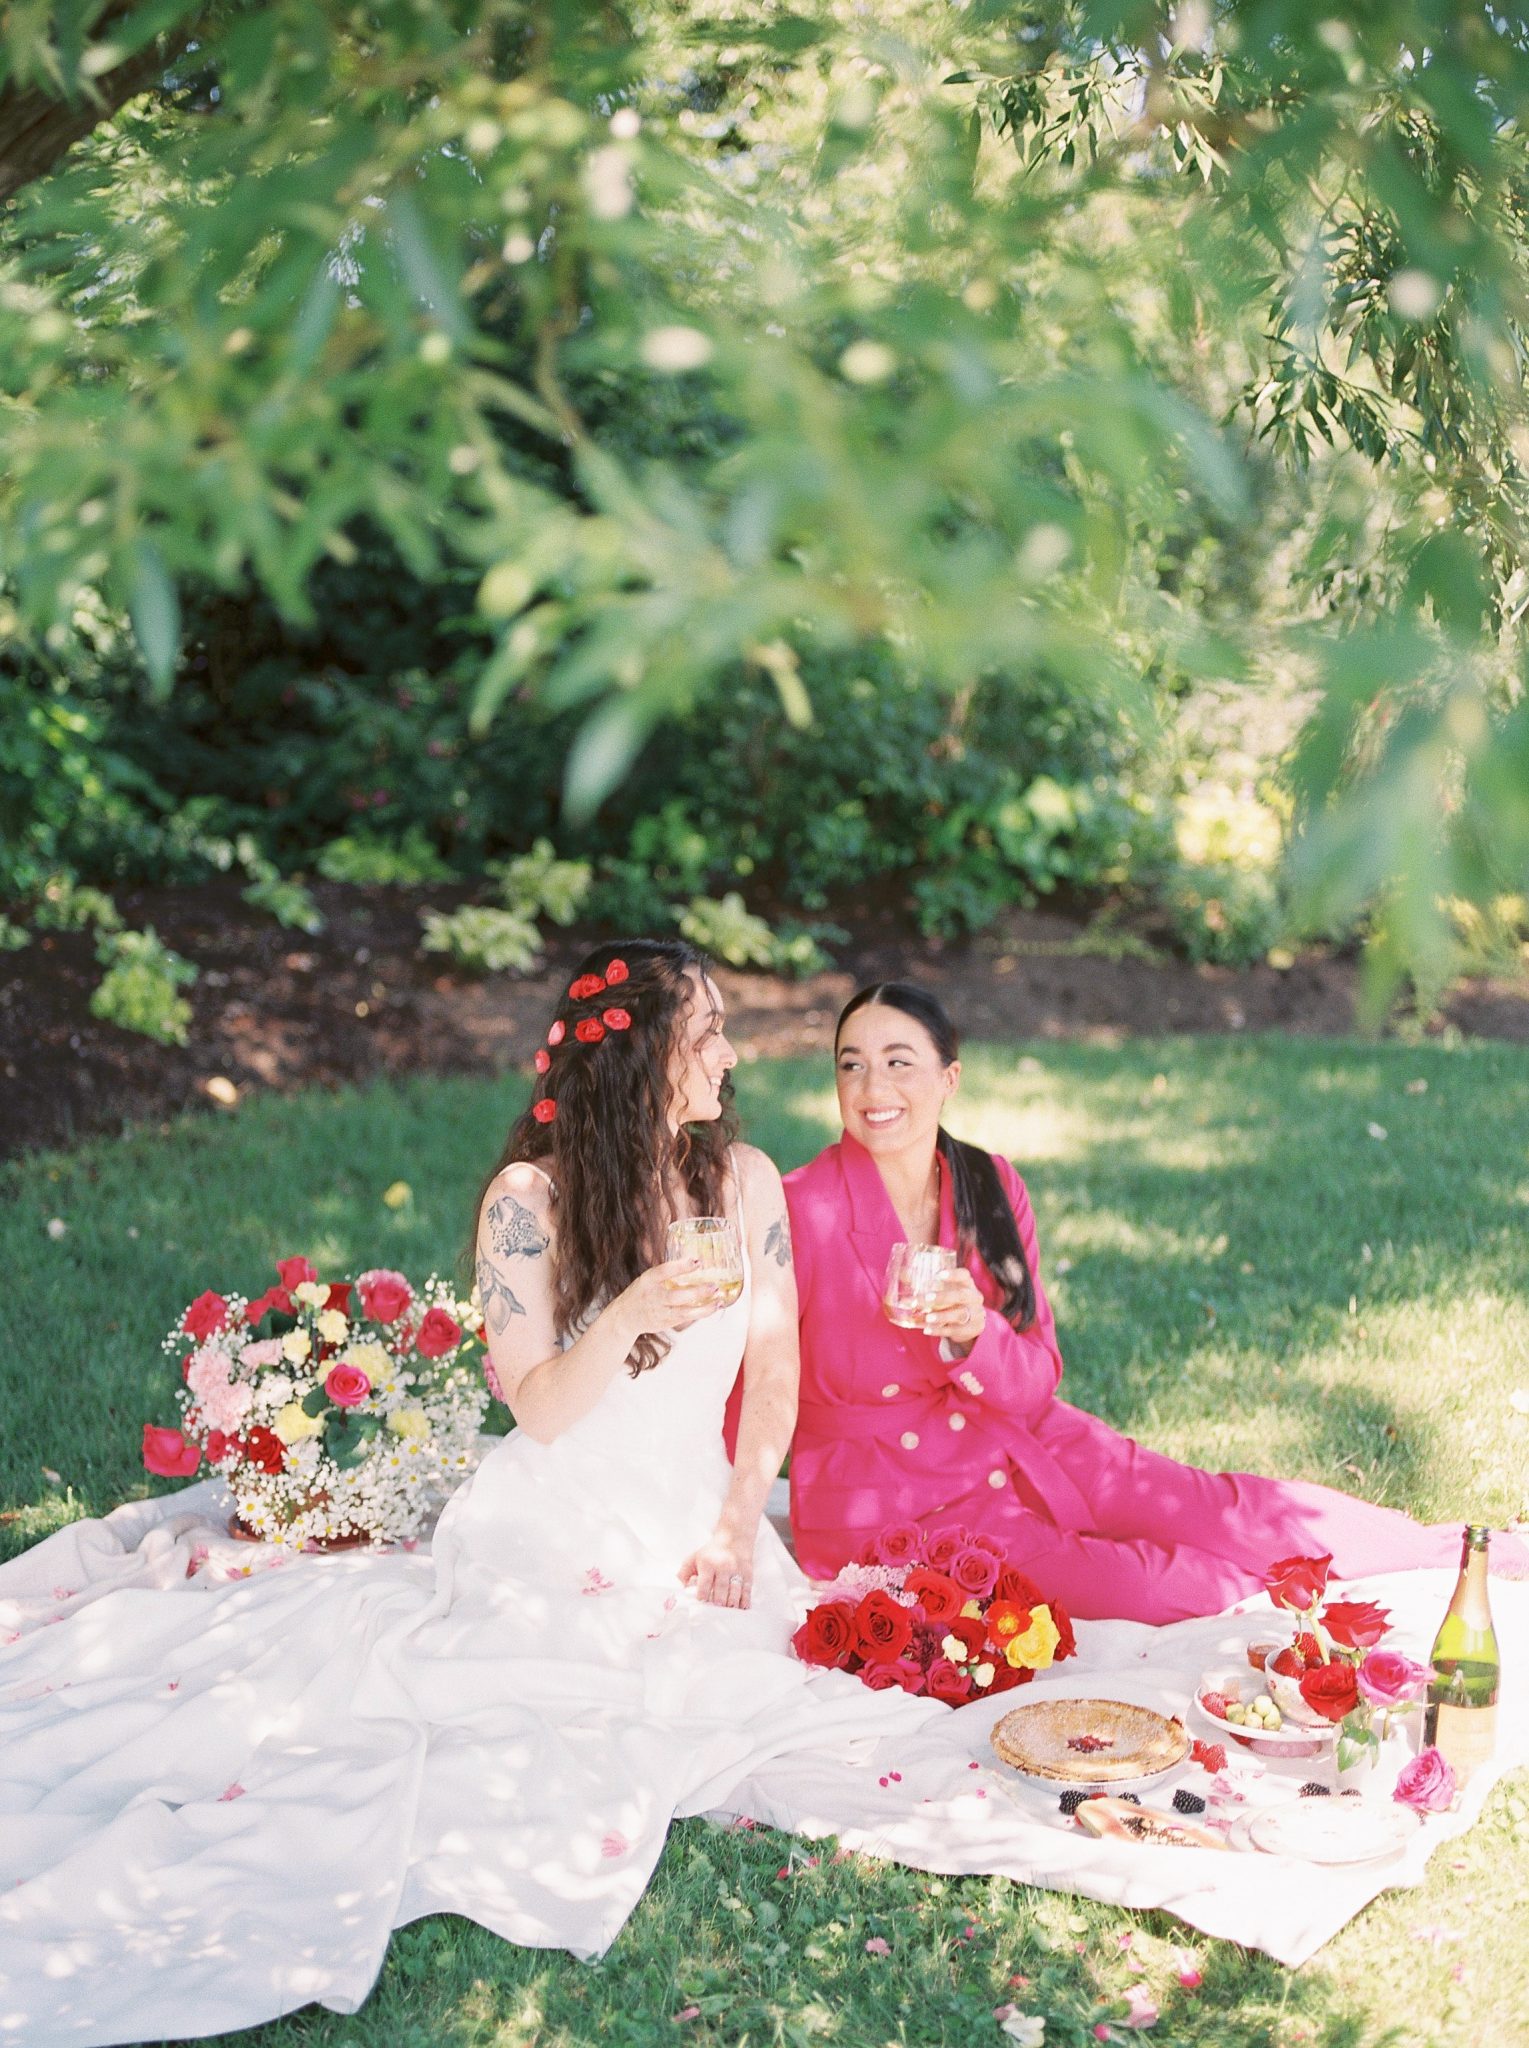 Hot Pink Perfection for this Picnic in the Park Valentine's Day Inspiration Featured by Brontë Bride, pink suit, park picnic